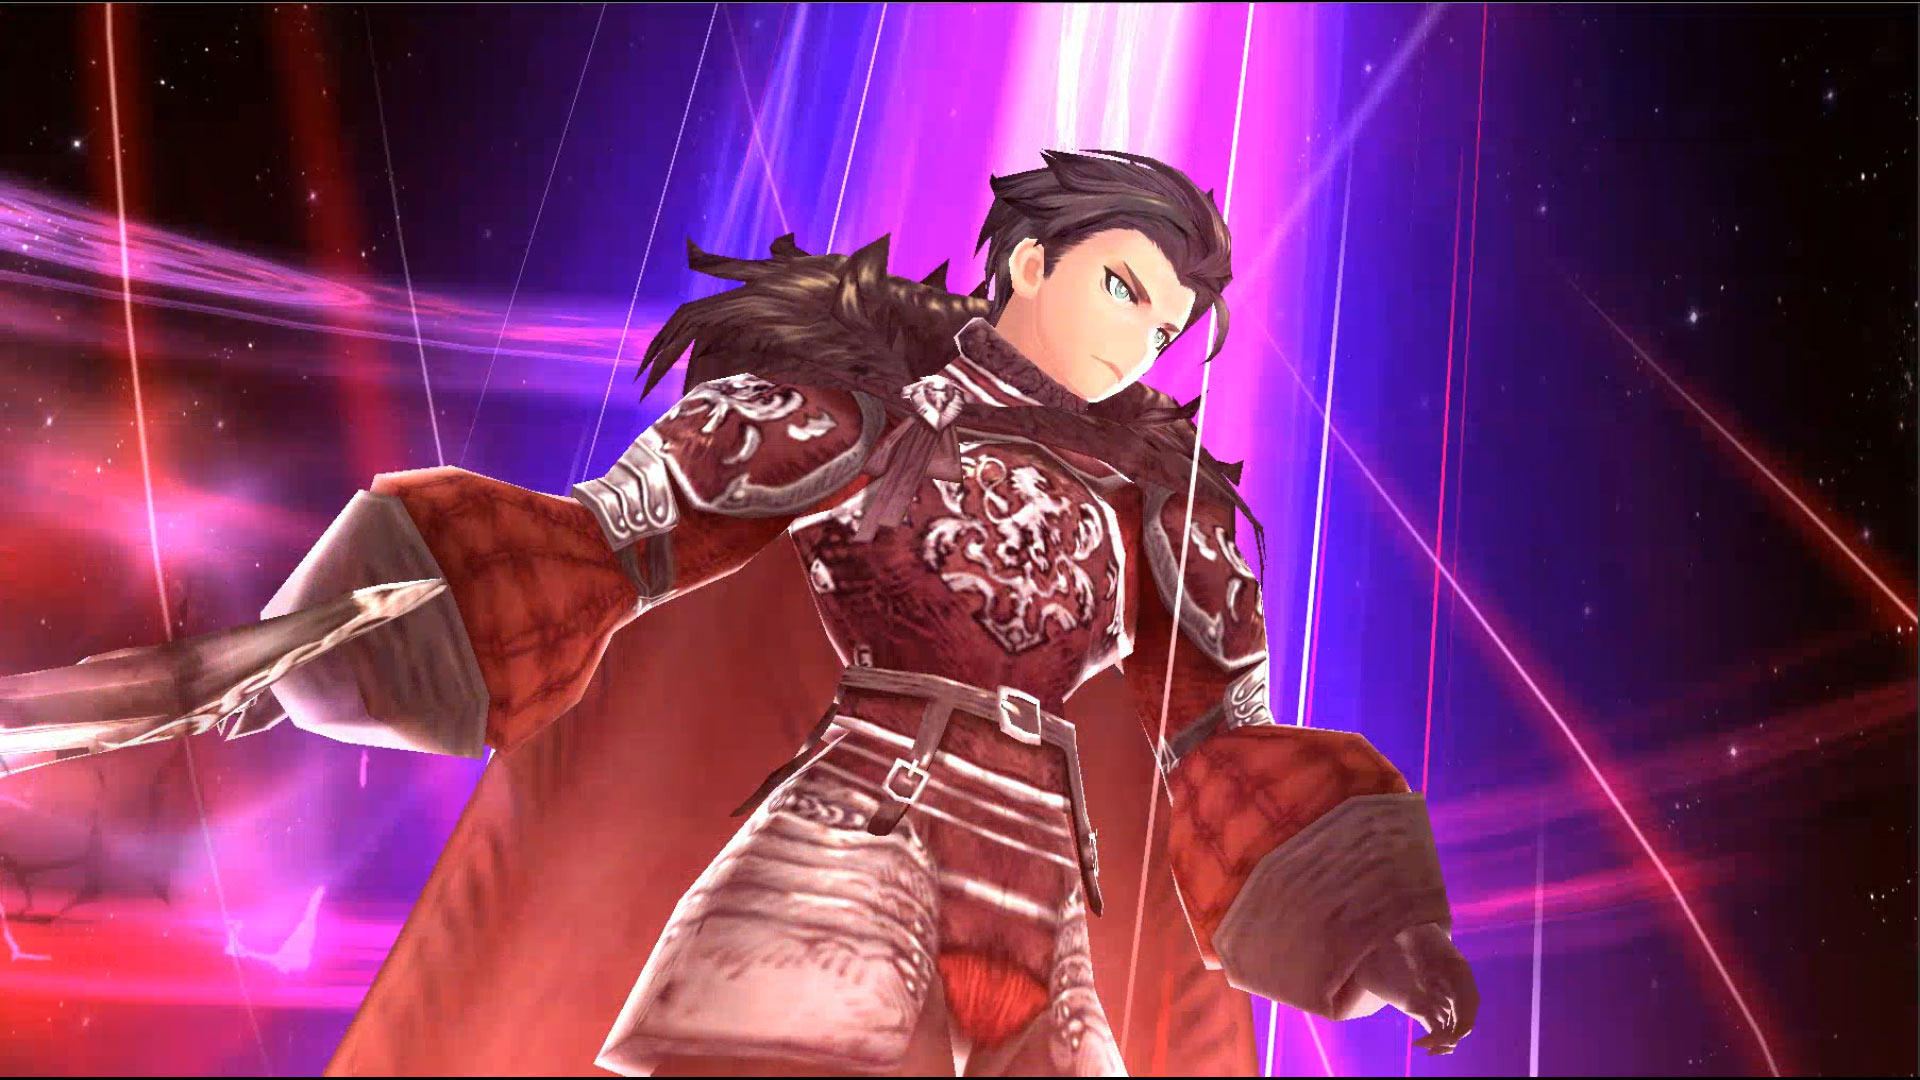 Best mobile strategy games: War of the Visions: Final Fantasy Brave Exvius. Image shows a man with dark hair standing in a beam of light.